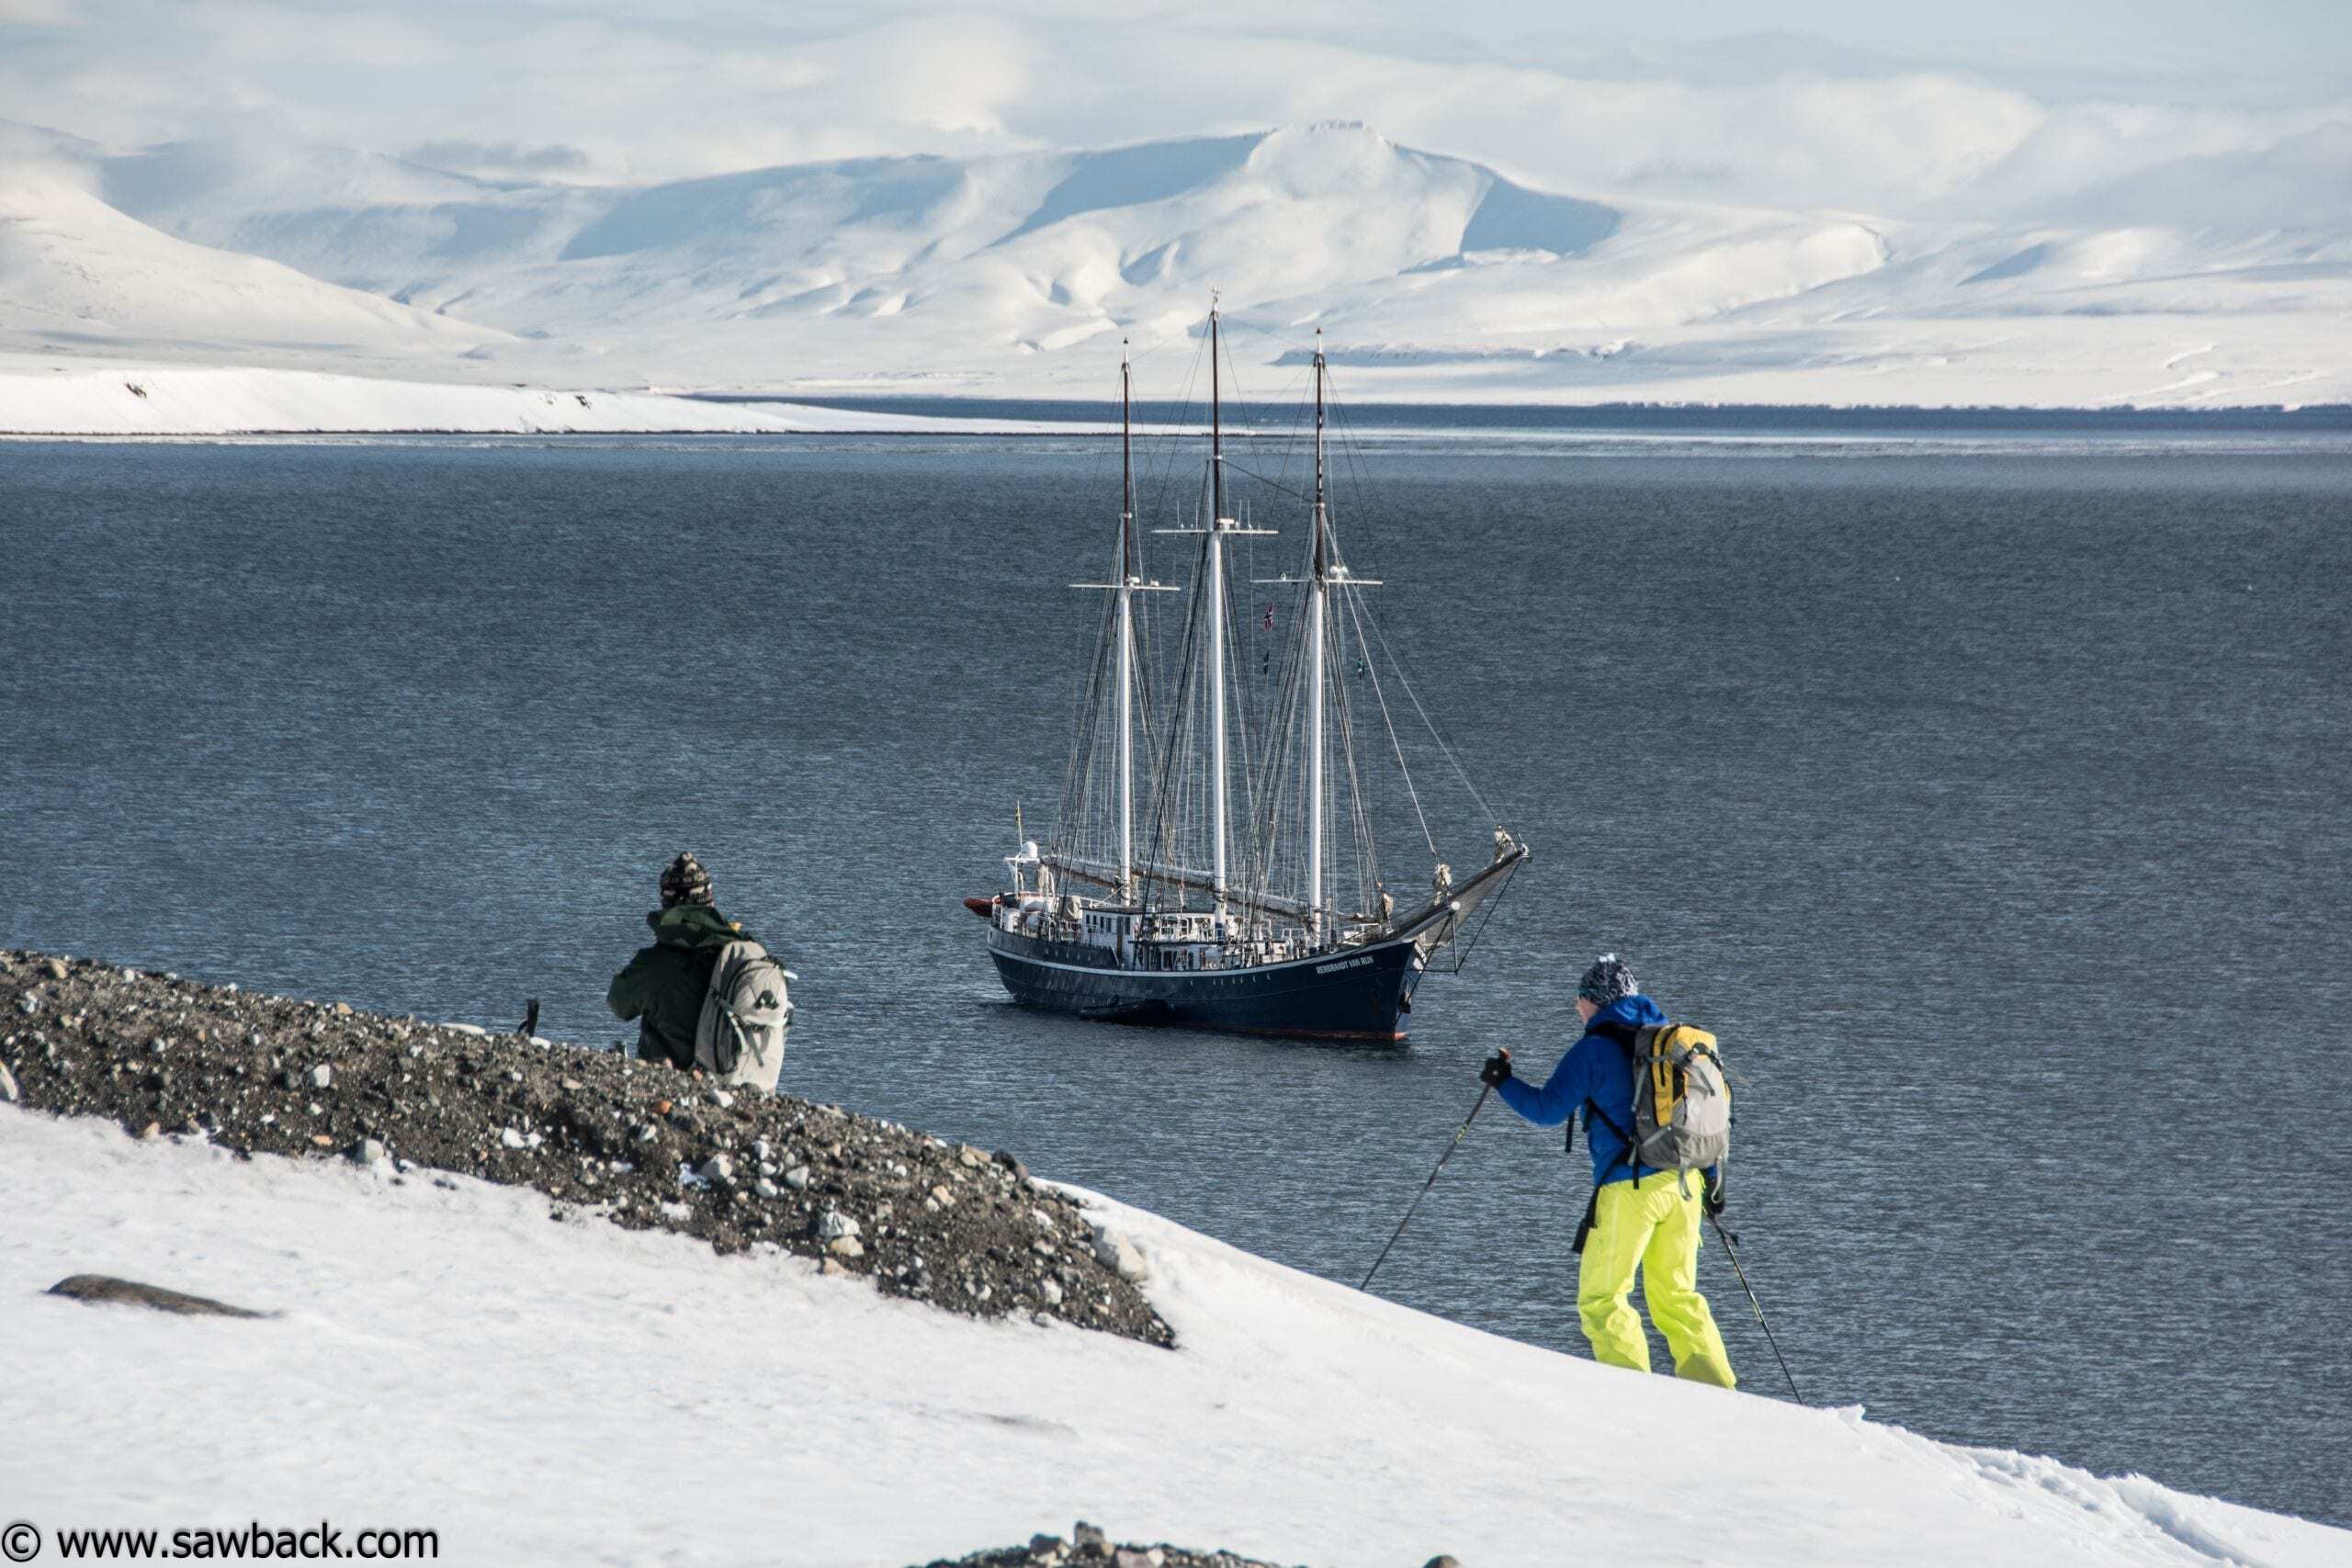 Skiing back down to the sailboat at the end of a day of ski touring on Svalbard